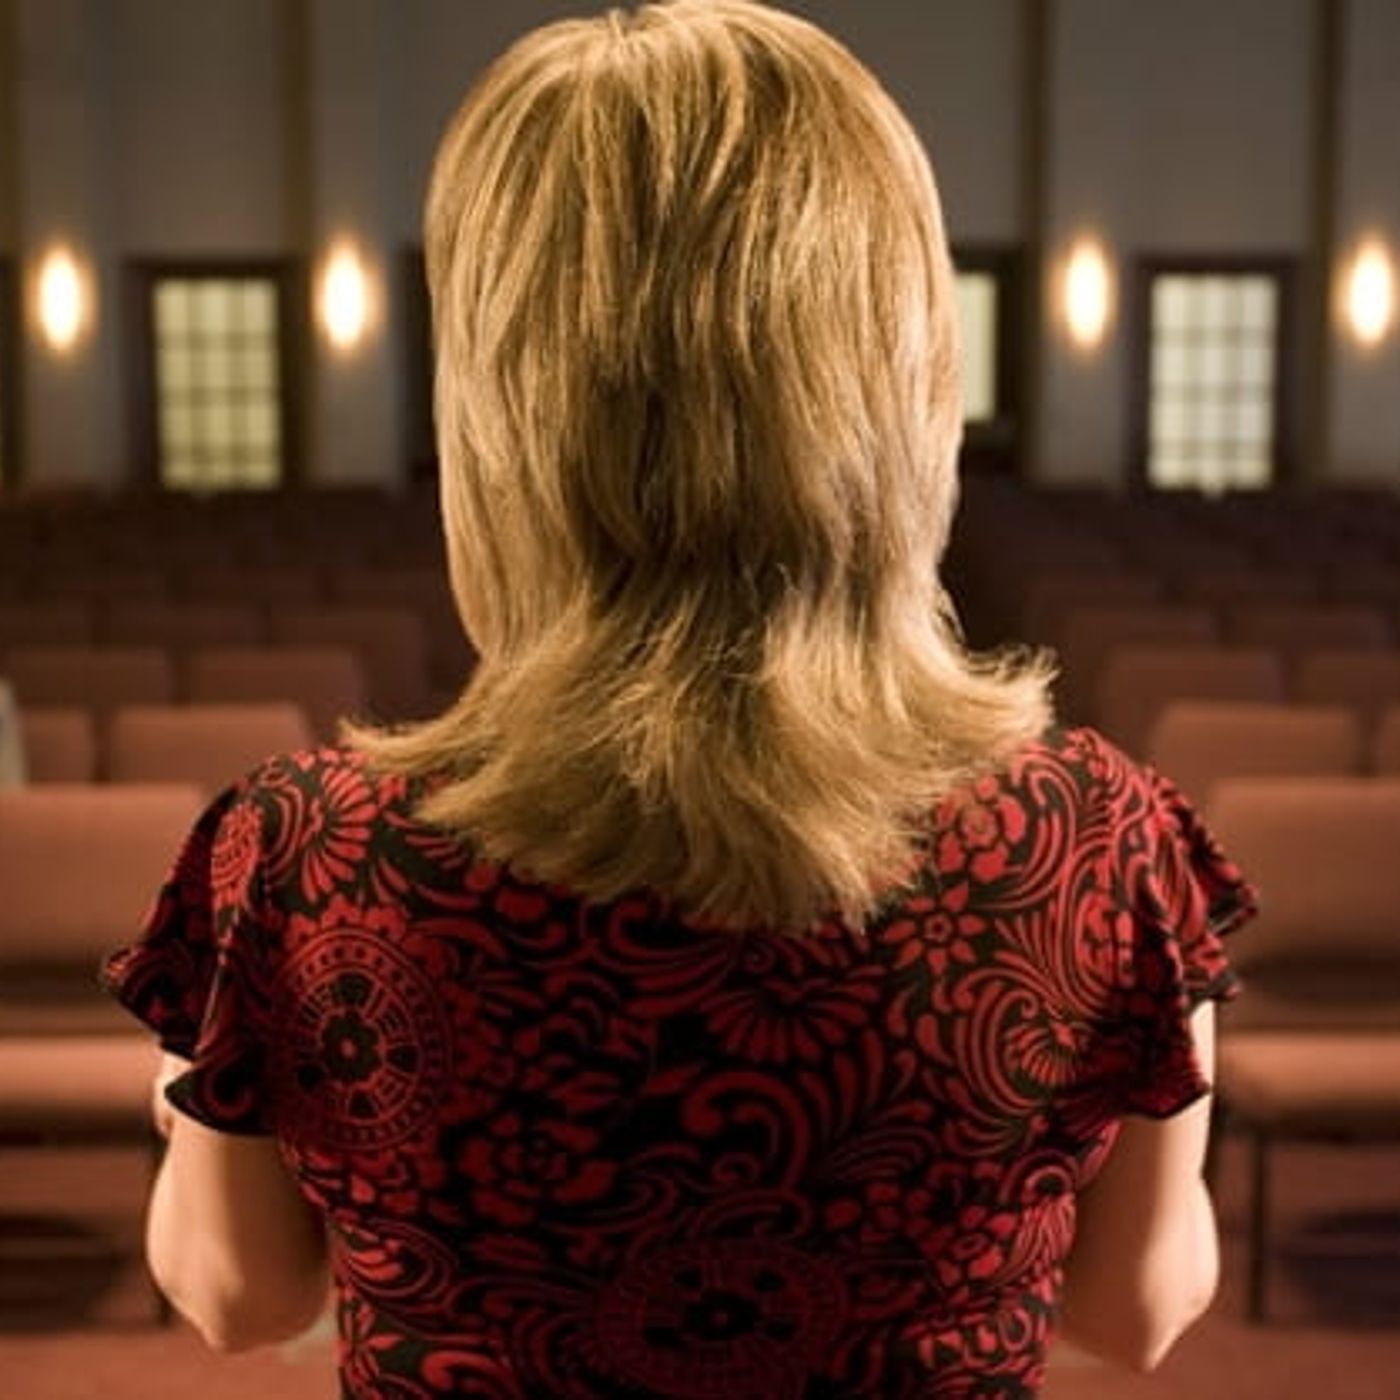 Should We Reconsider What the Bible Says About Women?